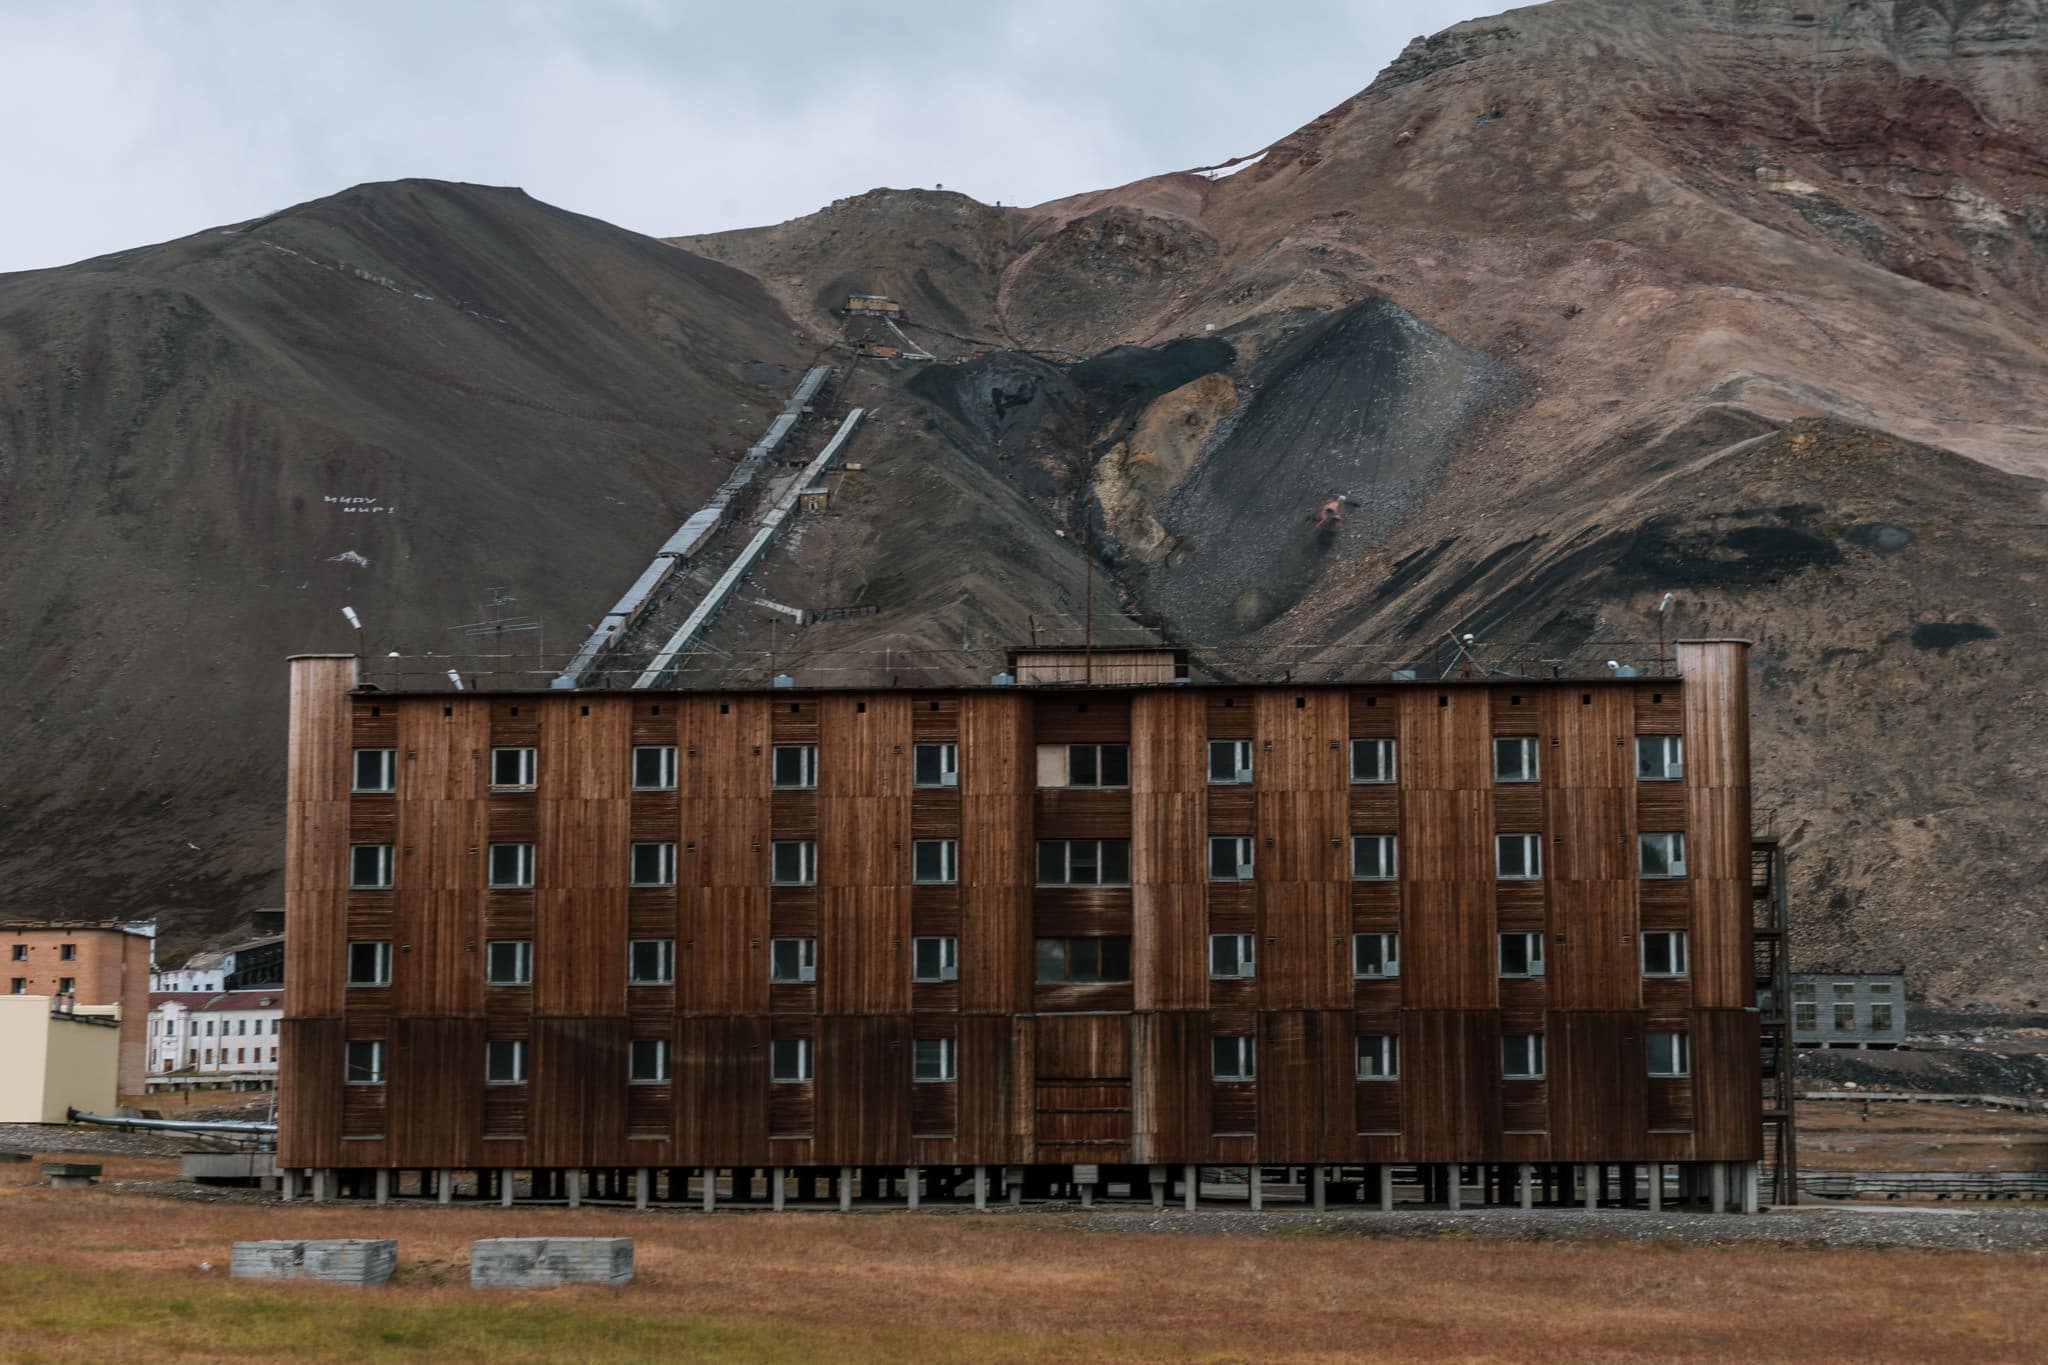 Pyramiden is a long lost settlement on the northern part of the Svalbard archipelago in northernmost Norway. It used to be a russian mining town but is now a time capsule and a lost place. By photographer Michael Schauer